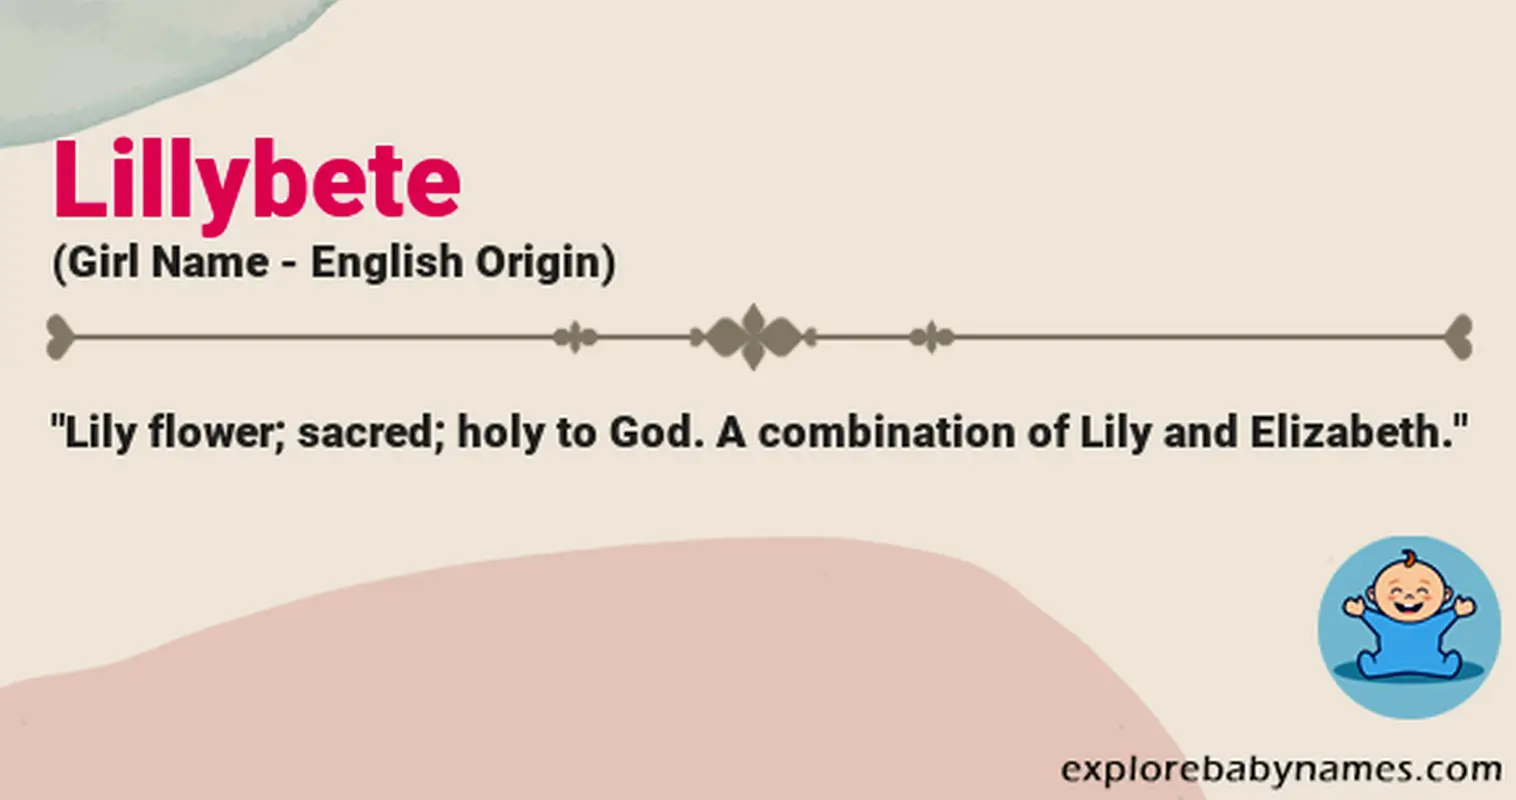 Meaning of Lillybete